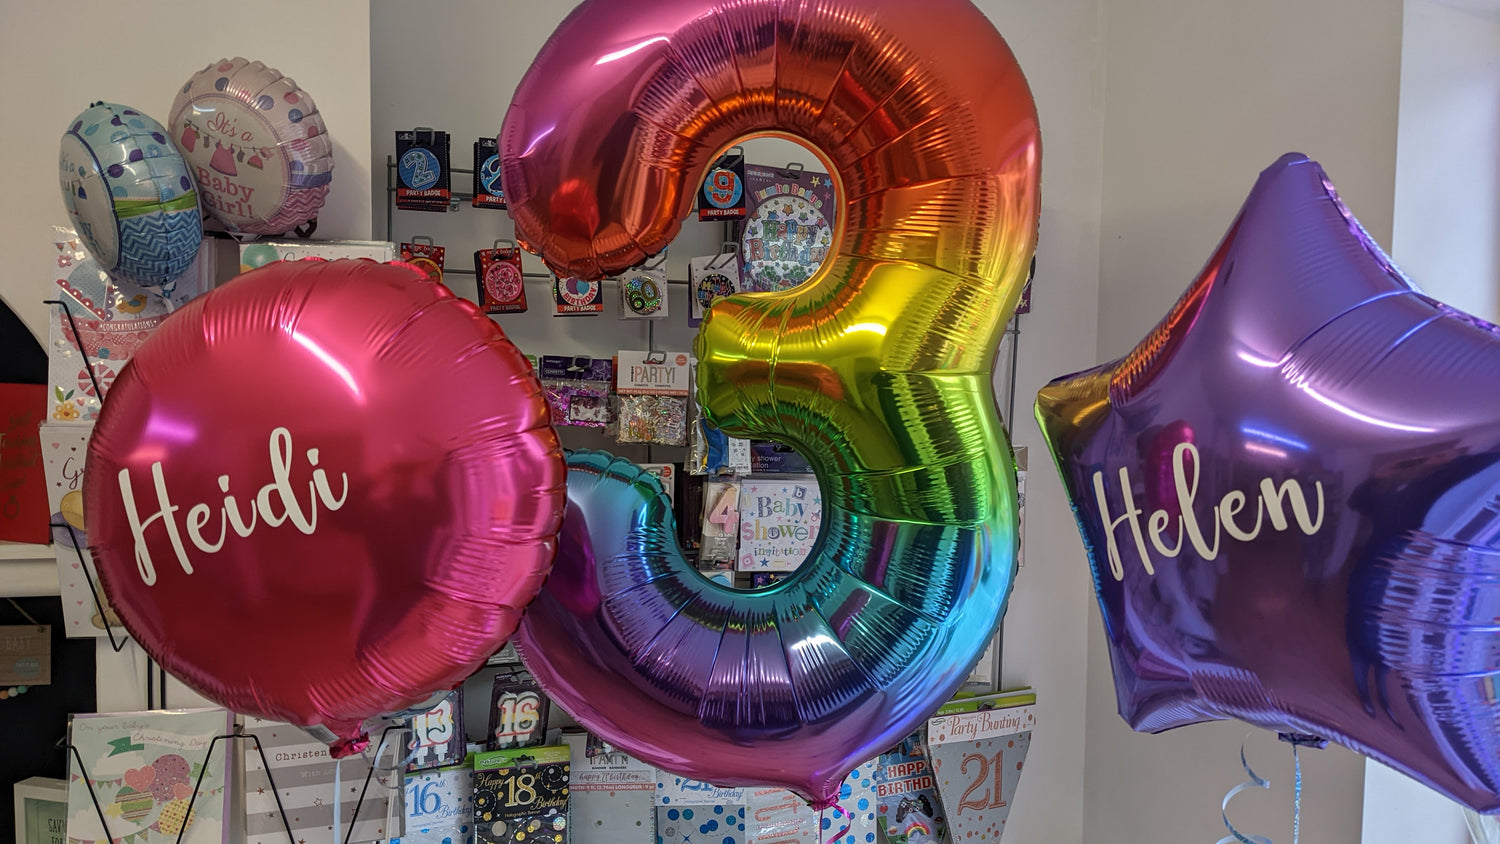 Beautiful happy birthday ballooons delivered to a friend or loved one. Supplied inflated with helium and ready to open for perfect gift for a birthday to remember.  